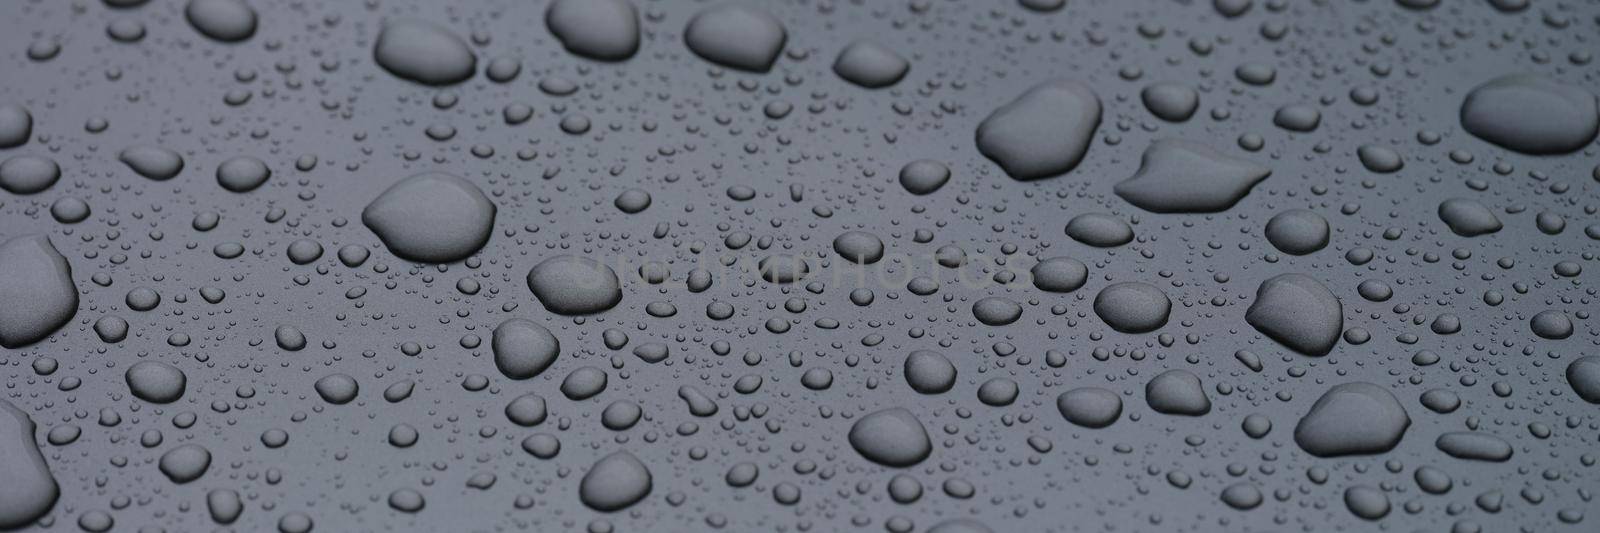 Closeup of raindrops on dark glass background by kuprevich